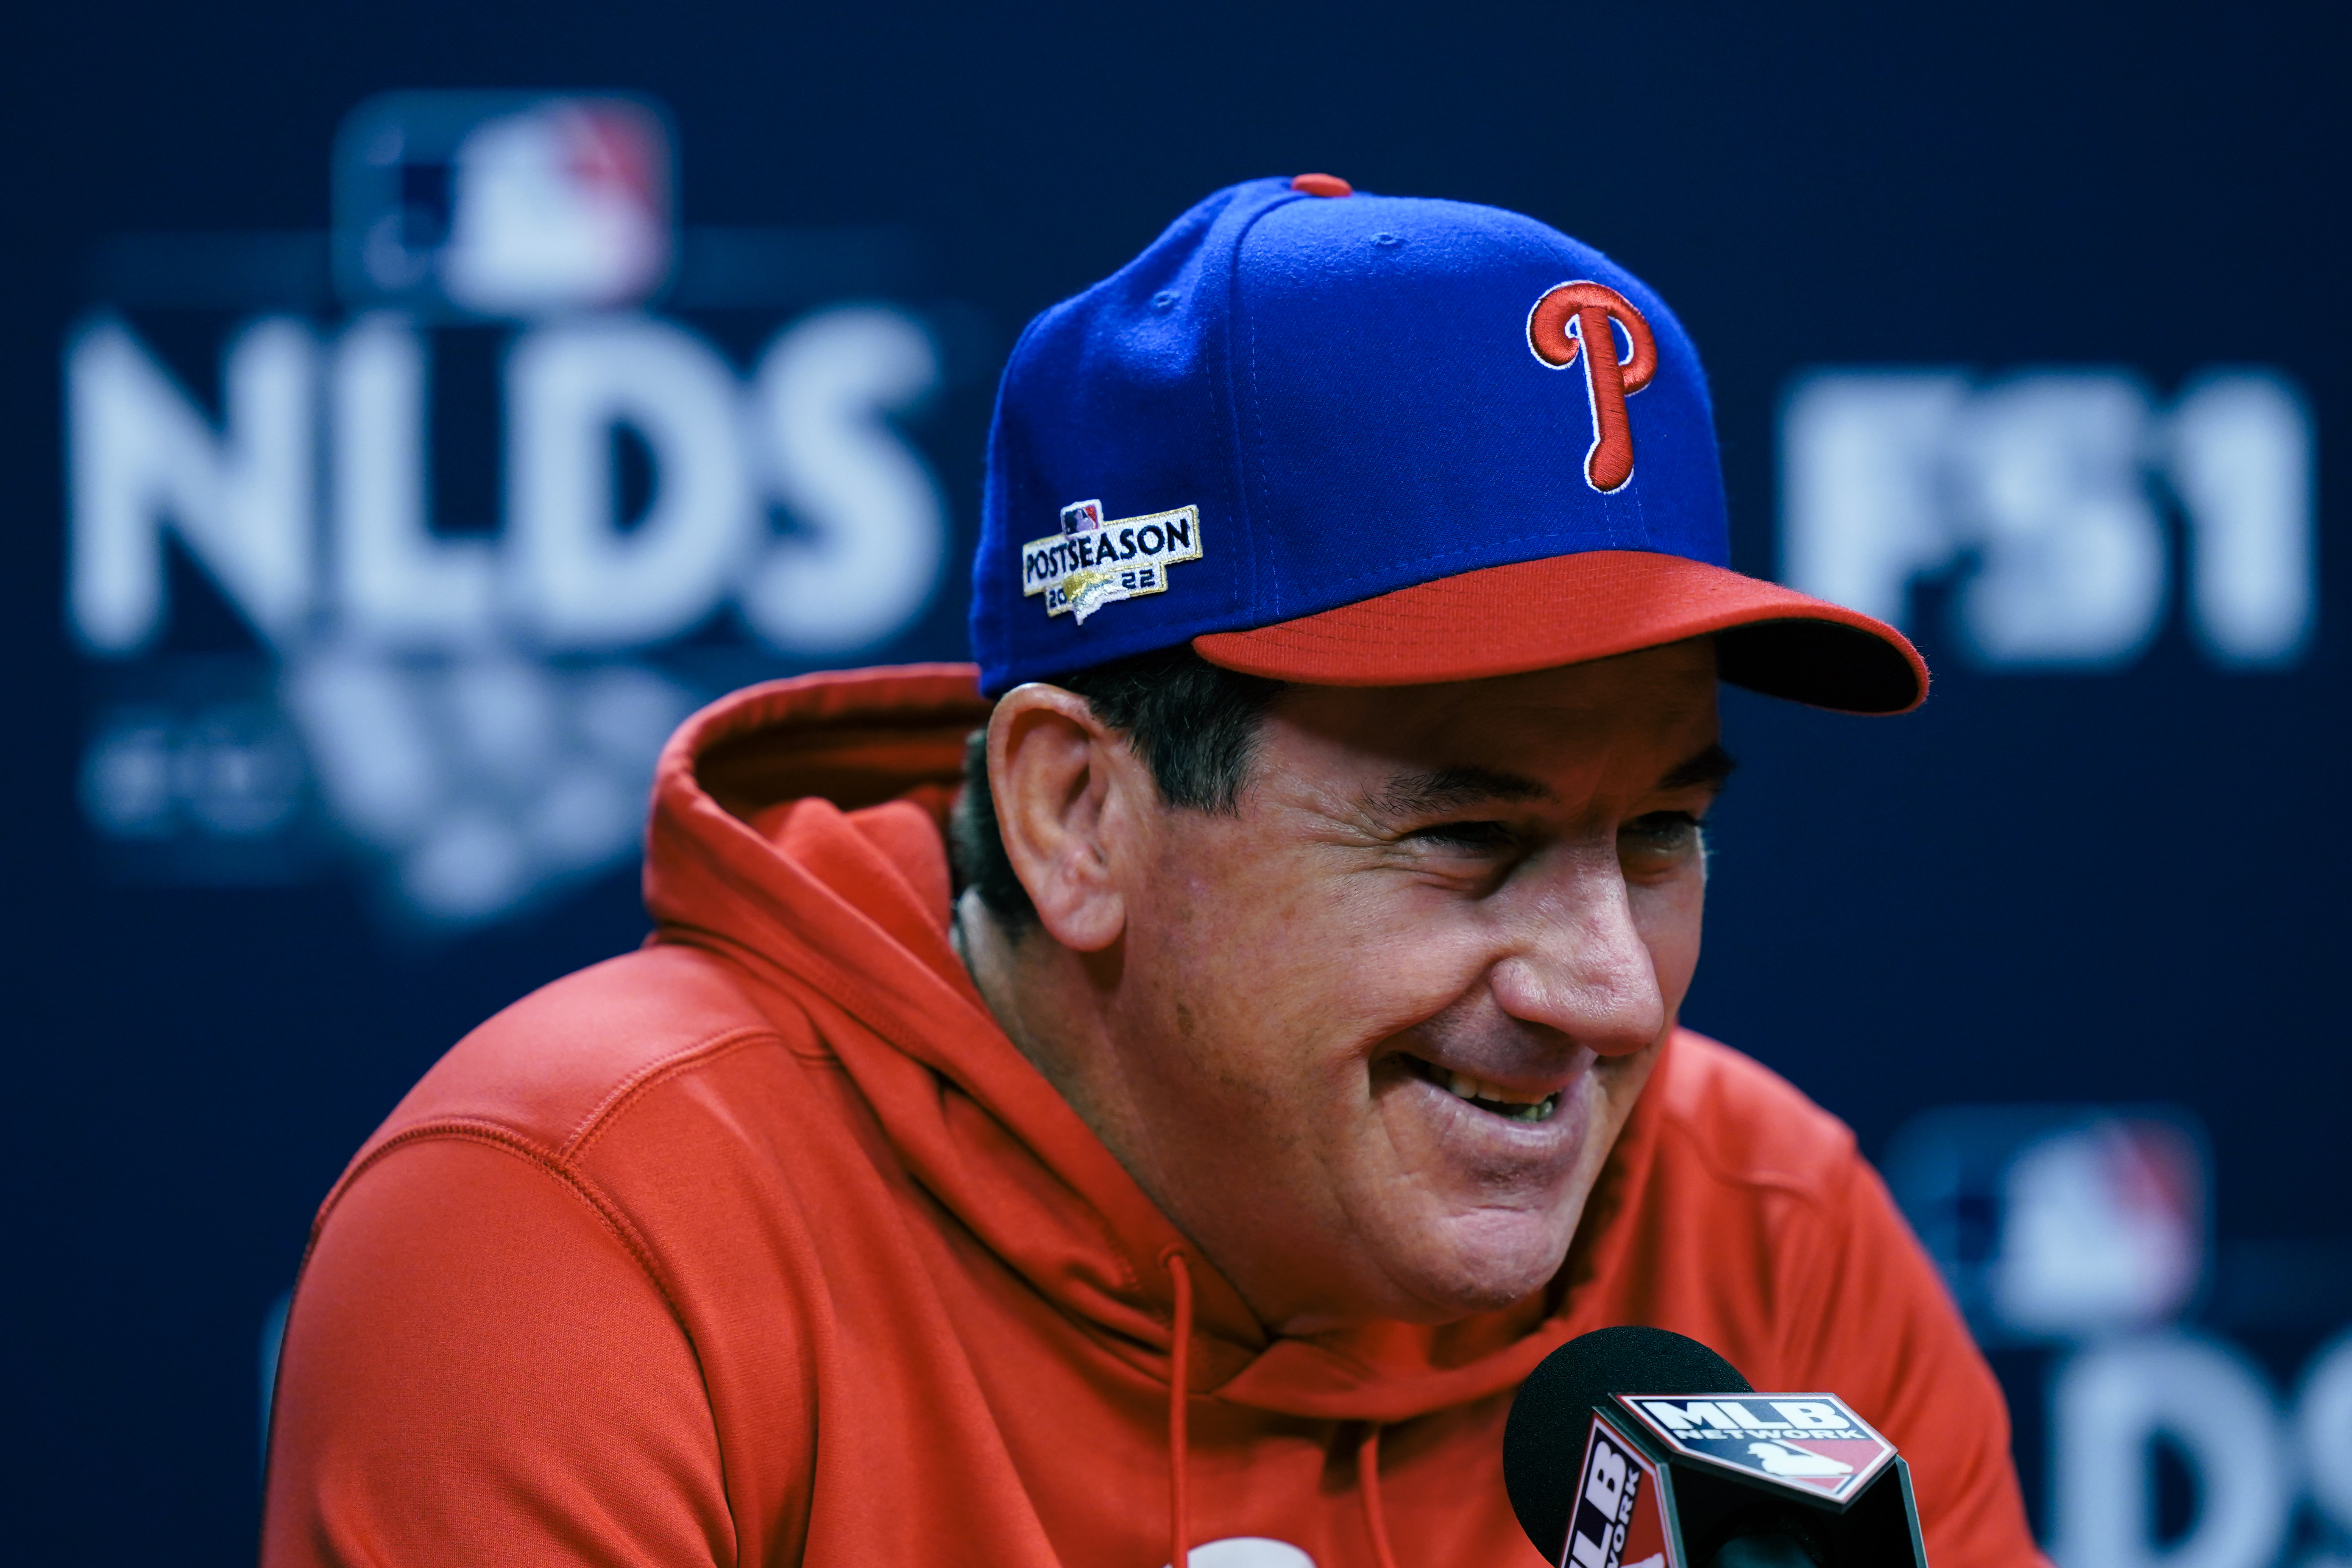 Phillies manager Rob Thomson has interim tag removed